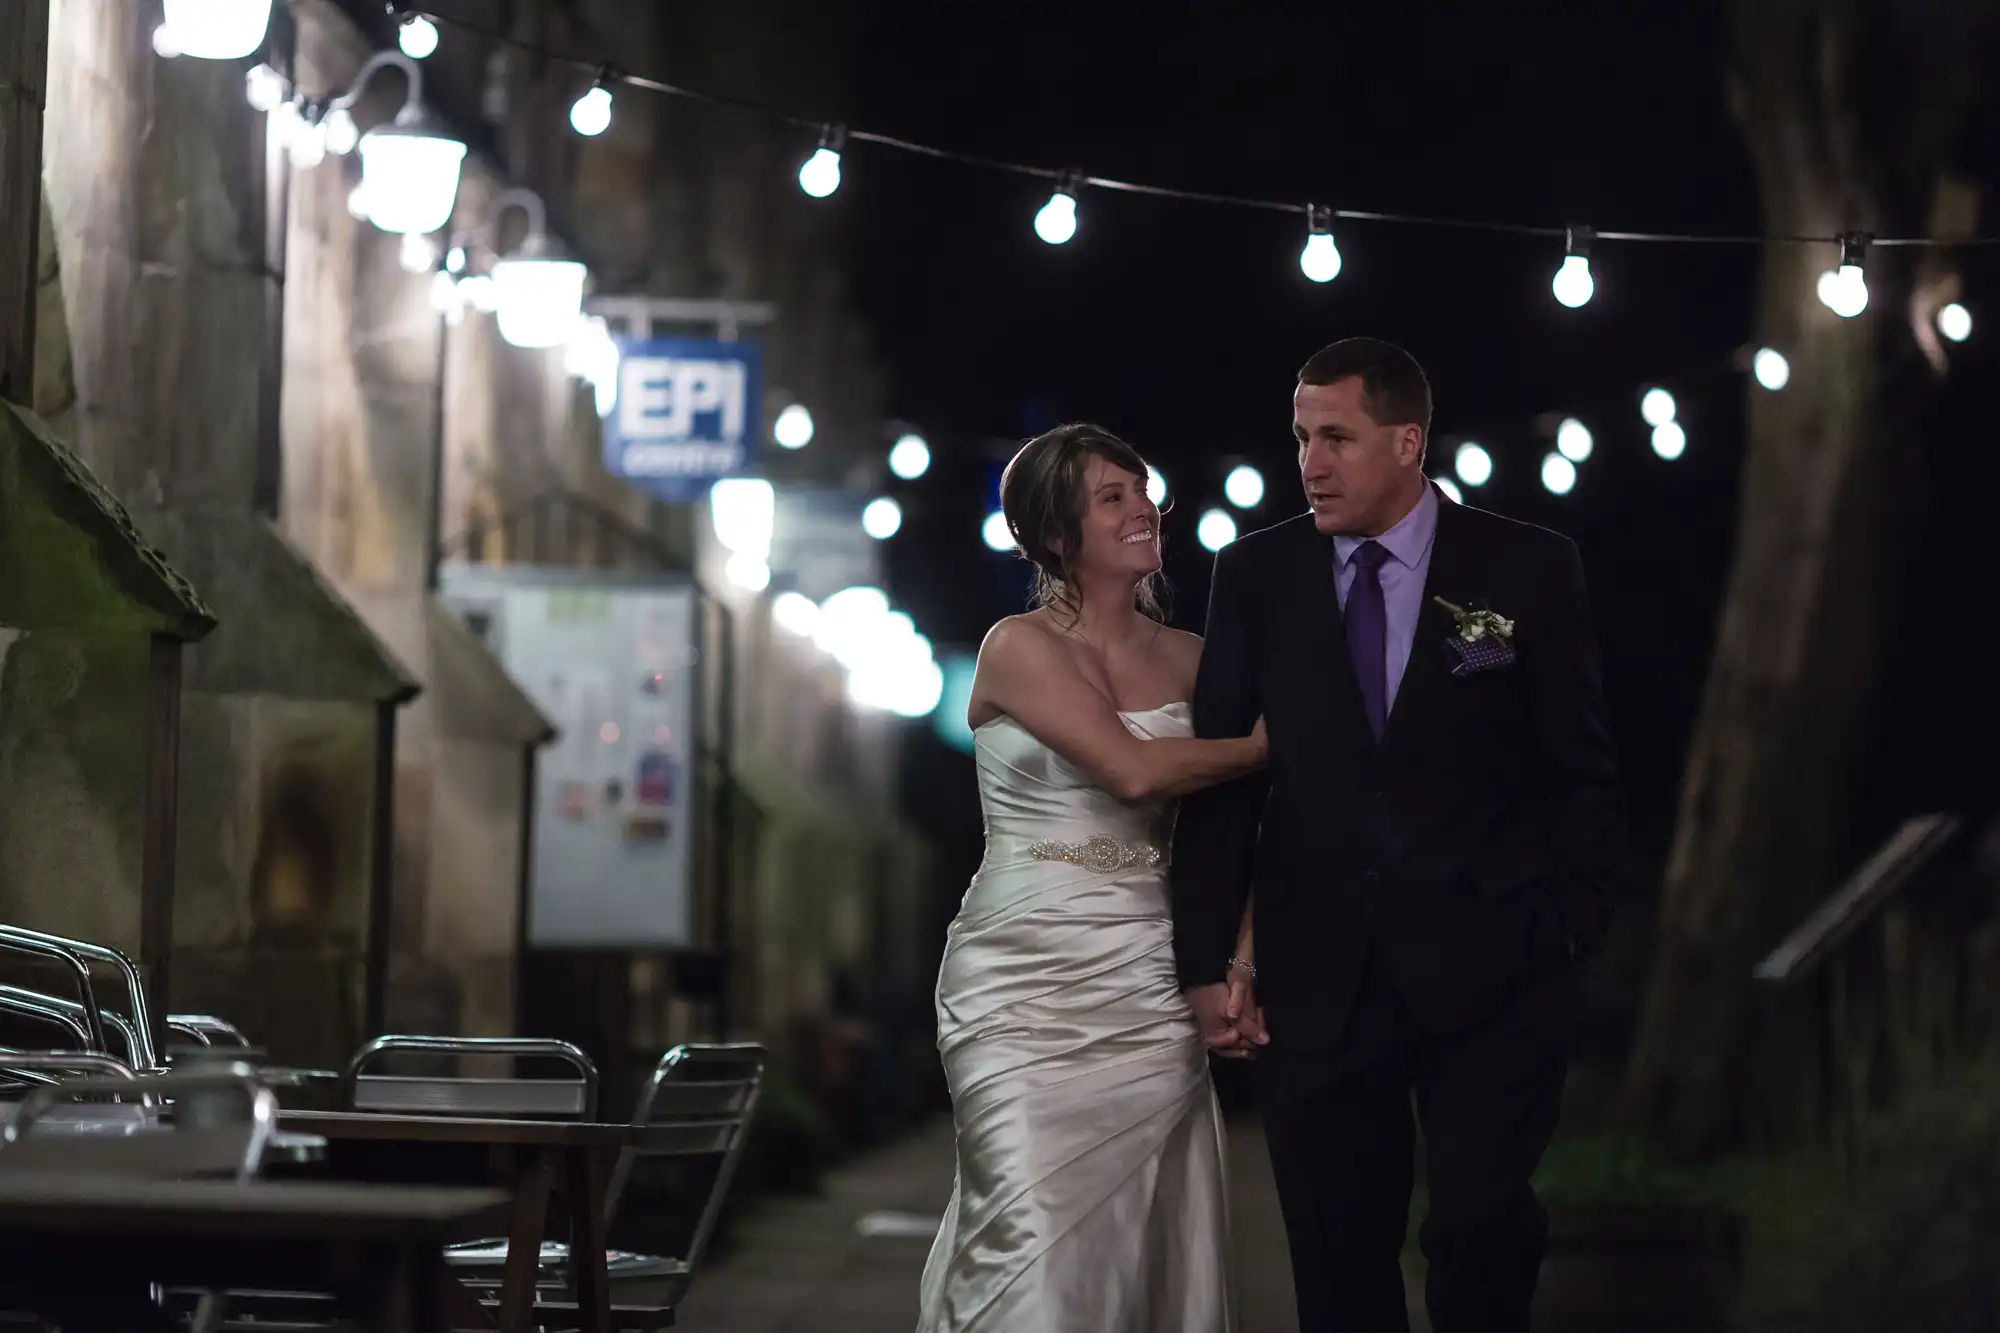 A bride and groom walk hand in hand at night along a warmly lit, narrow street adorned with string lights.